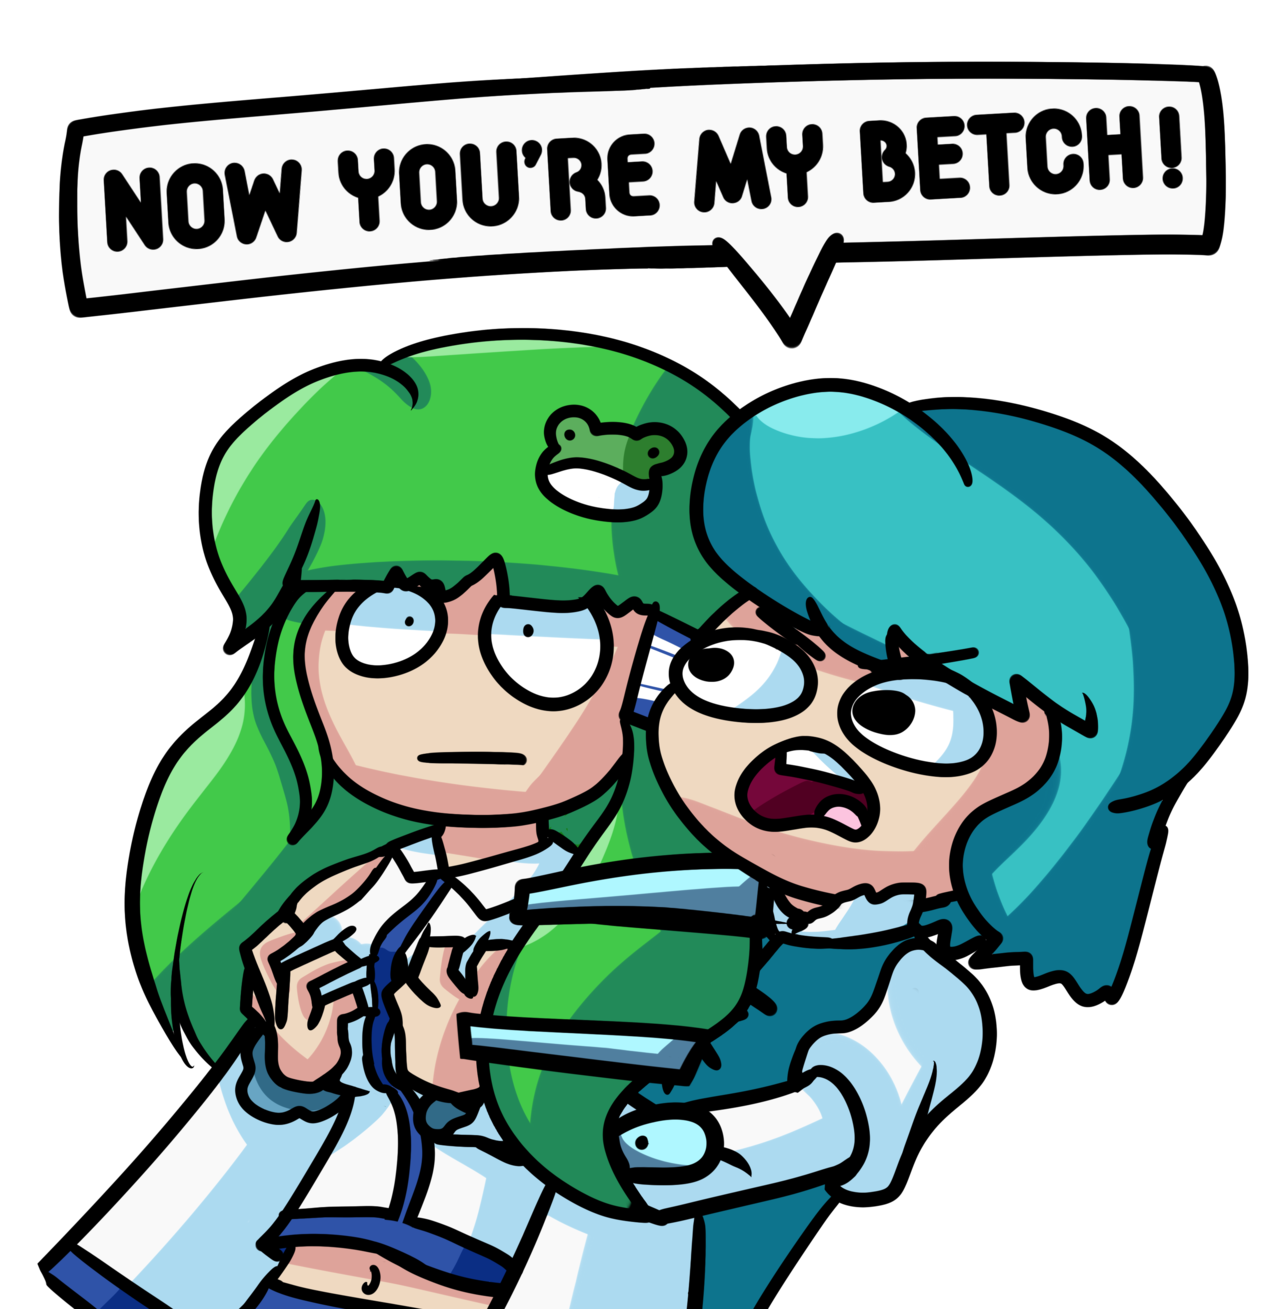 touhou___now_you_are_my_betch__by_i_freez-d70gp4o.png